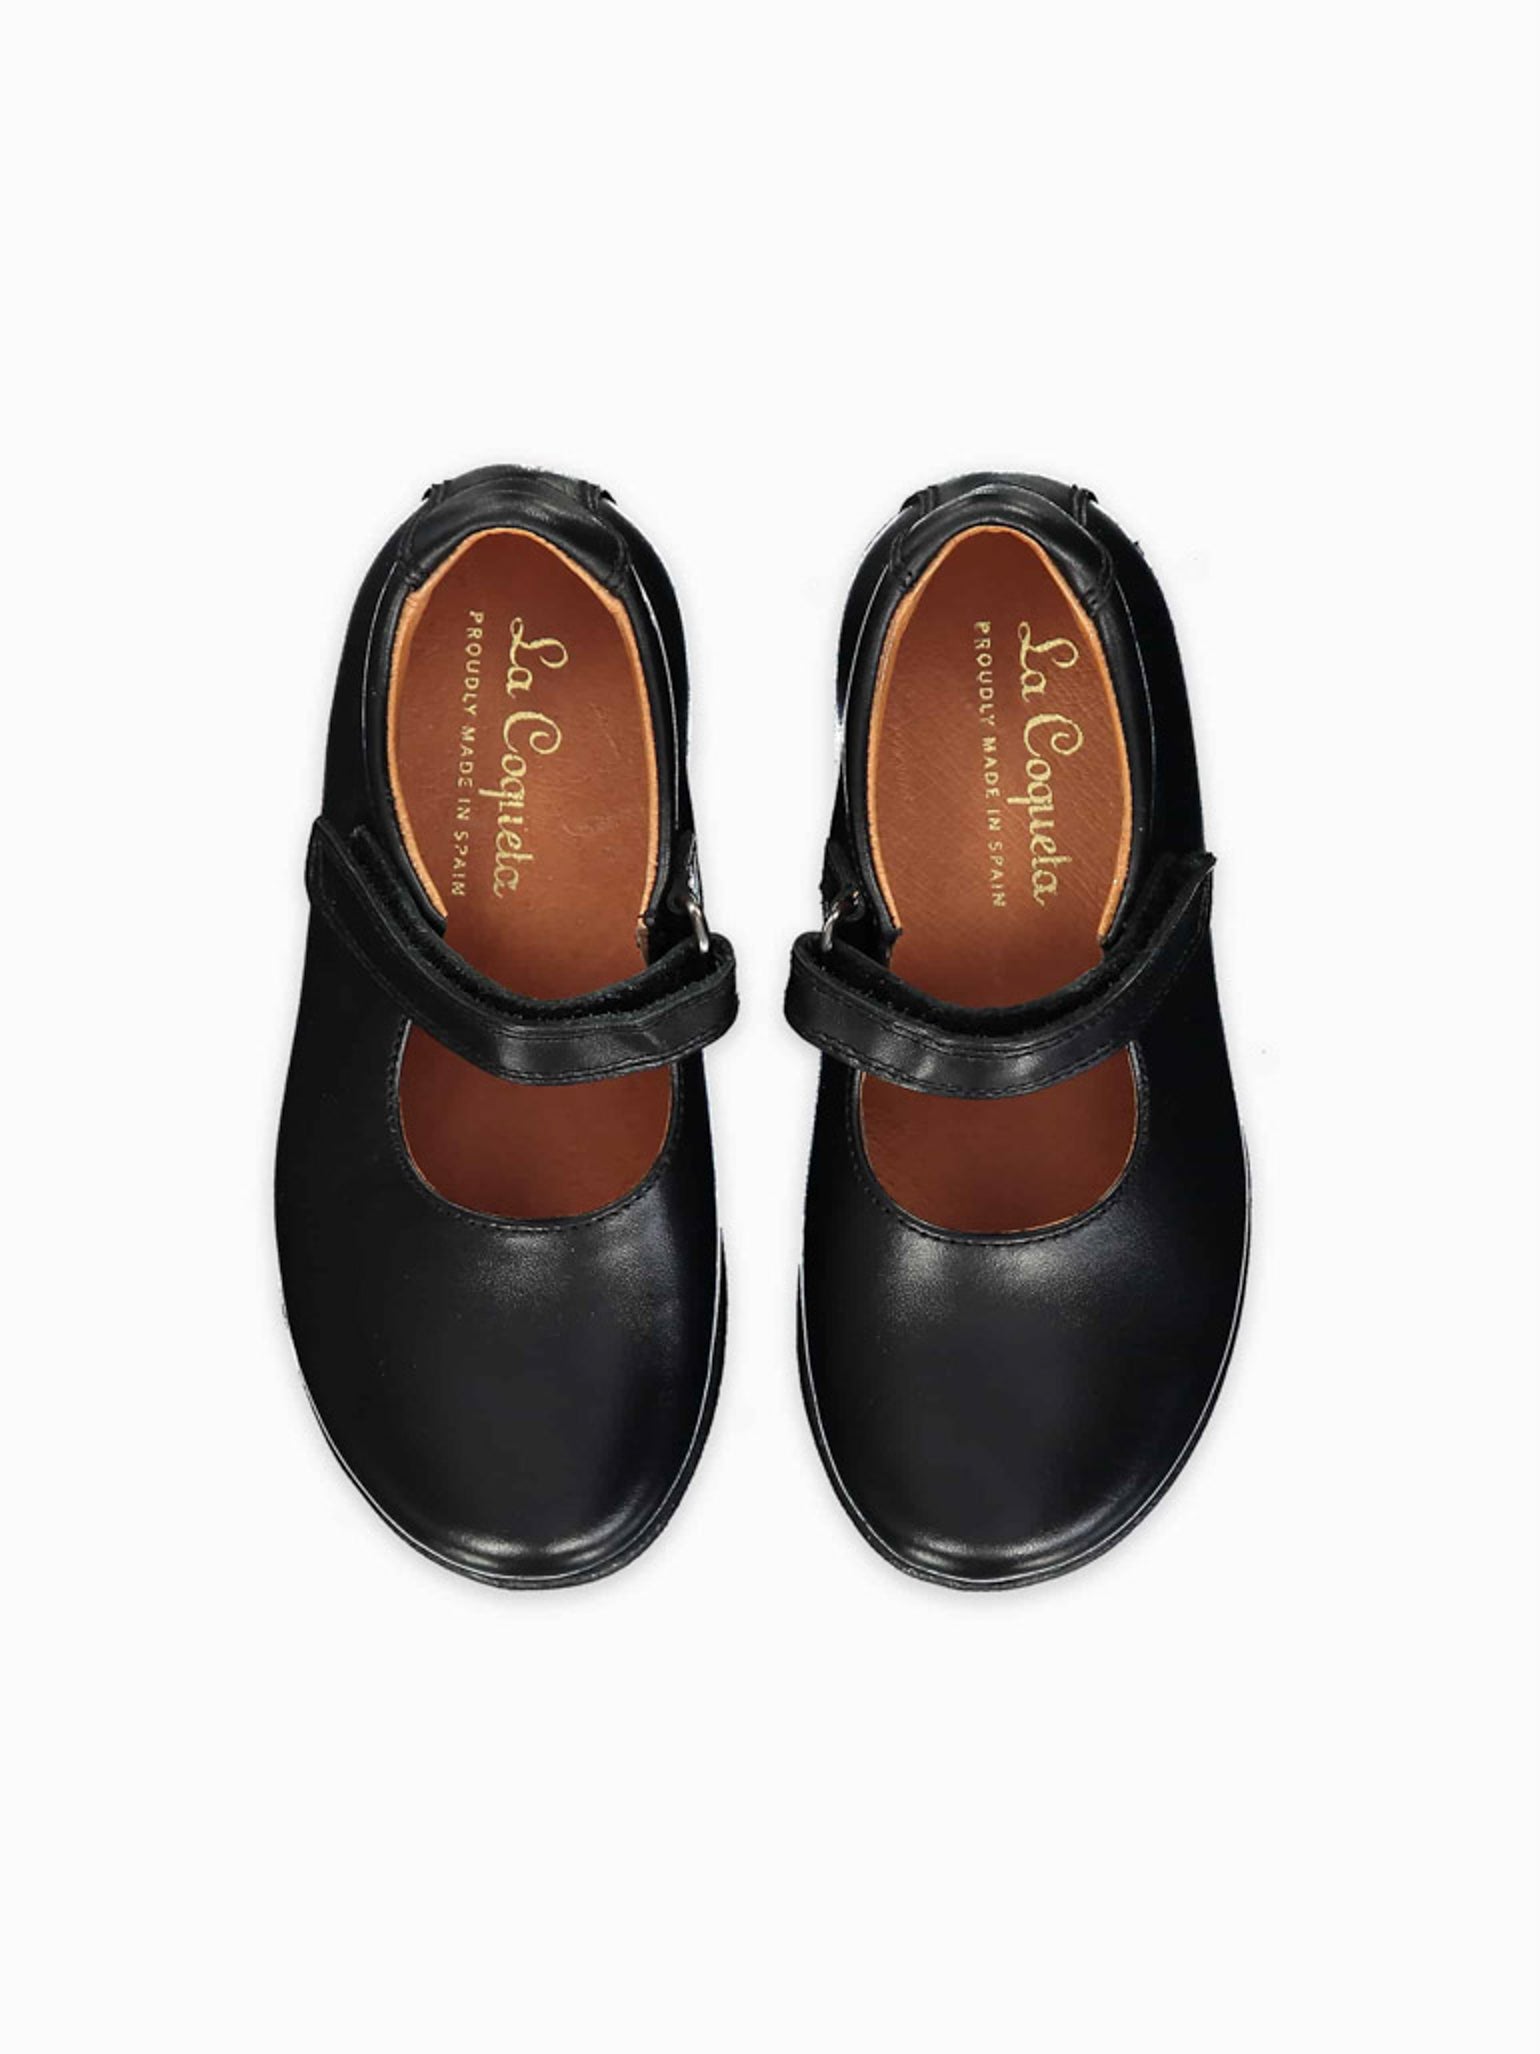 Stylish Gucci Kids Rubber Sandals for School & More